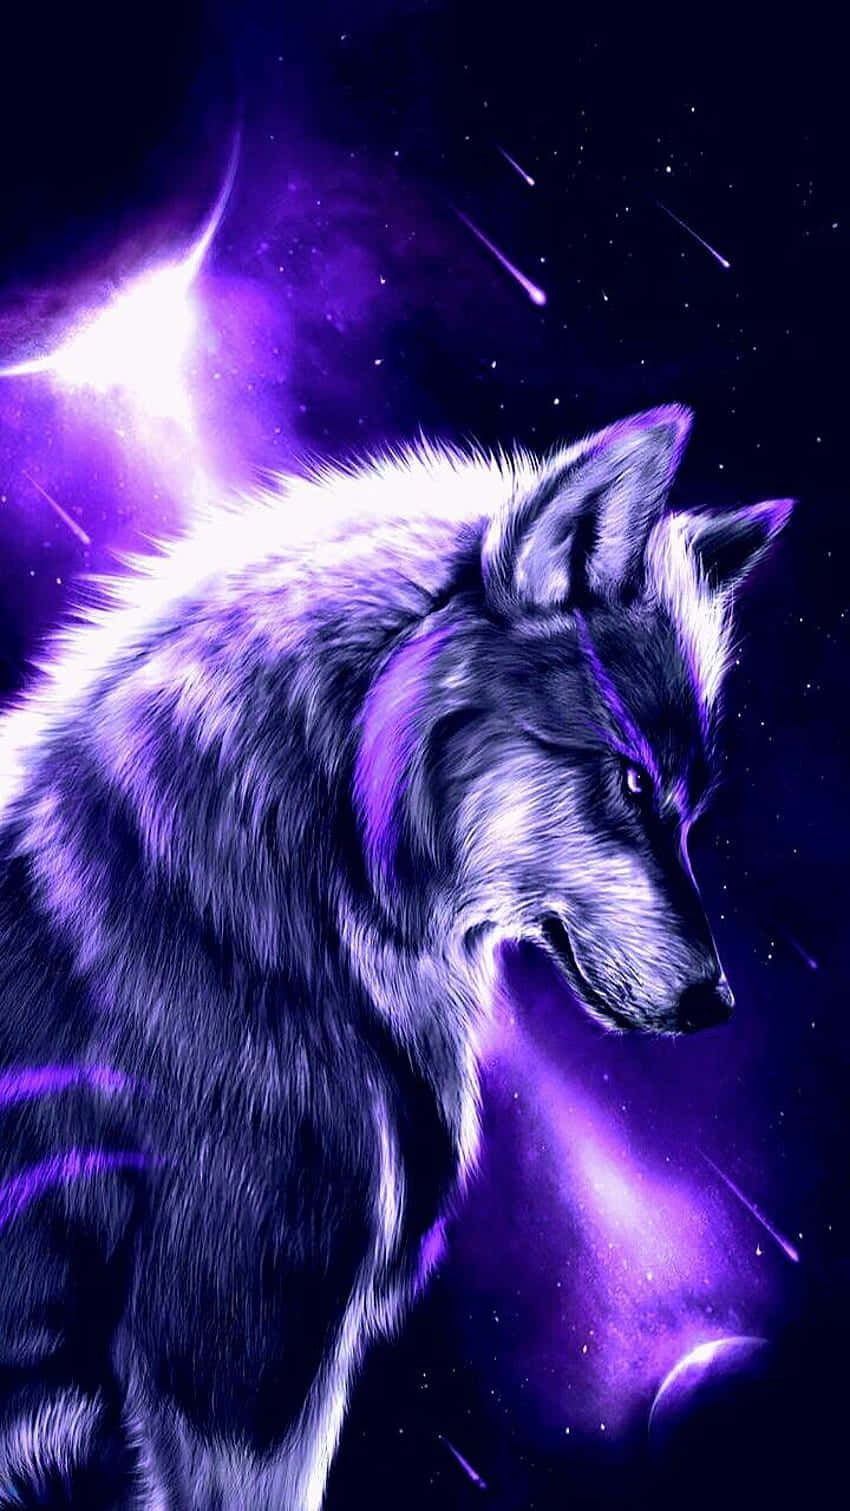 The Majestic Fire and Ice Wolf Illuminated by the Stars Wallpaper